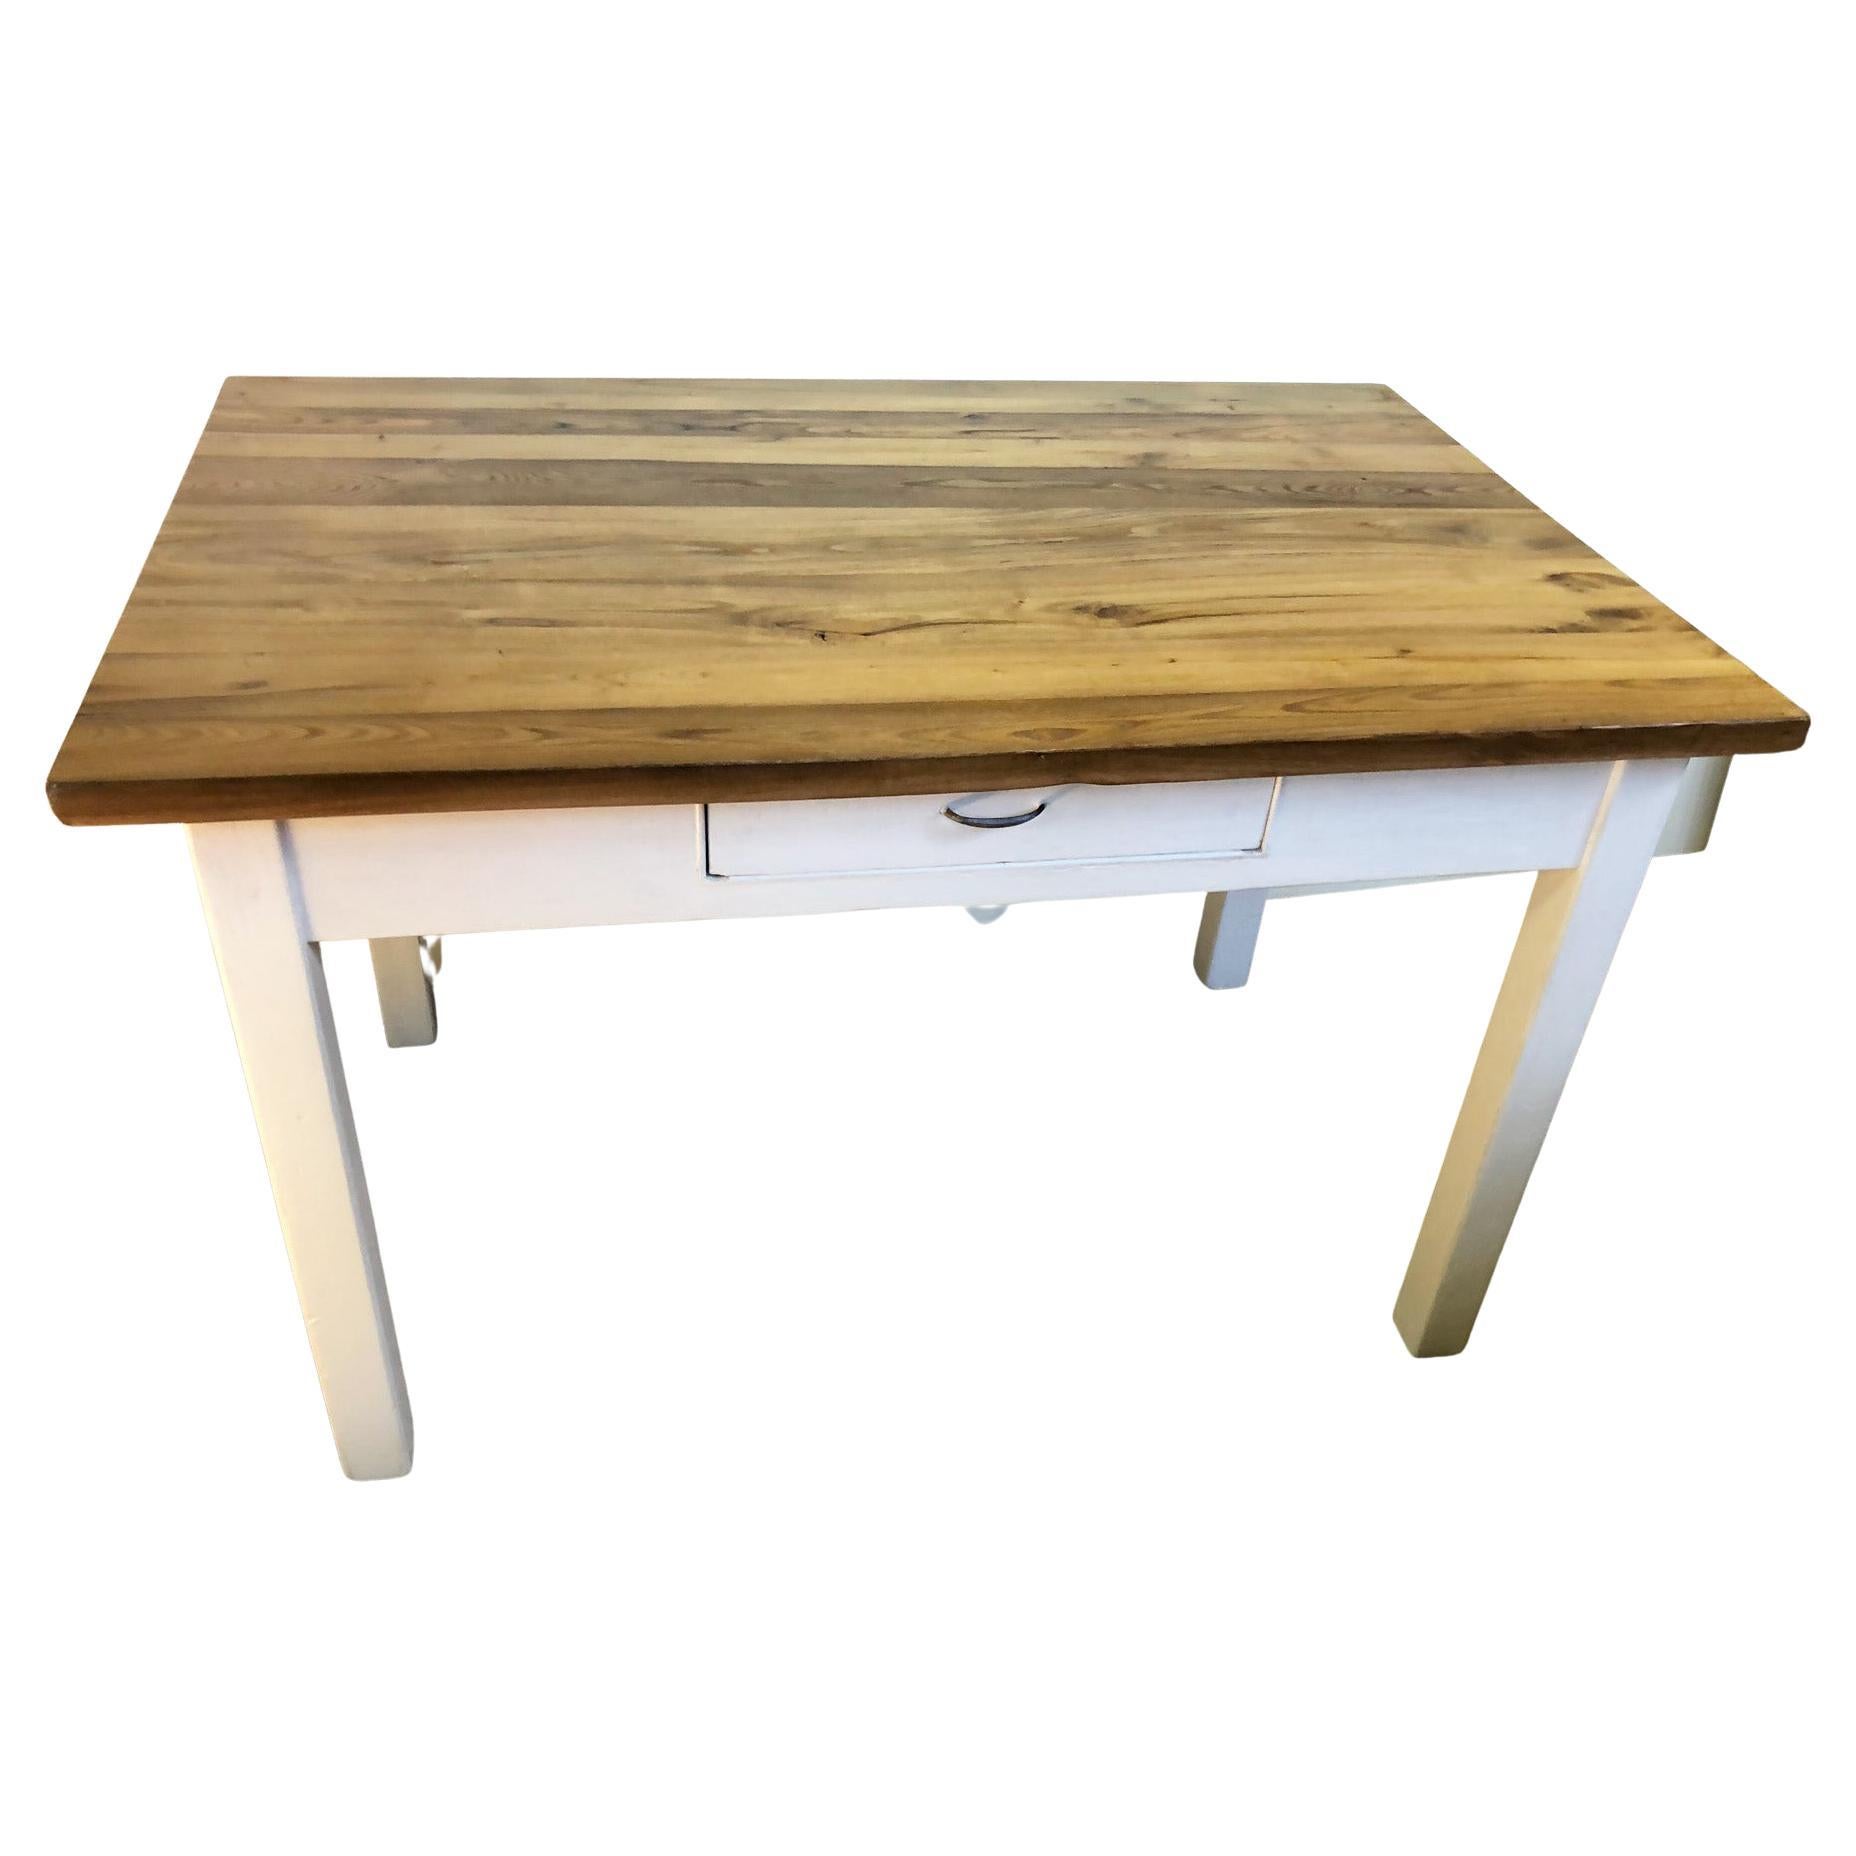 1940 Table Solid Chestnut and Fir, Two-Tone, Tuscany Italian, Honey-Colored Top